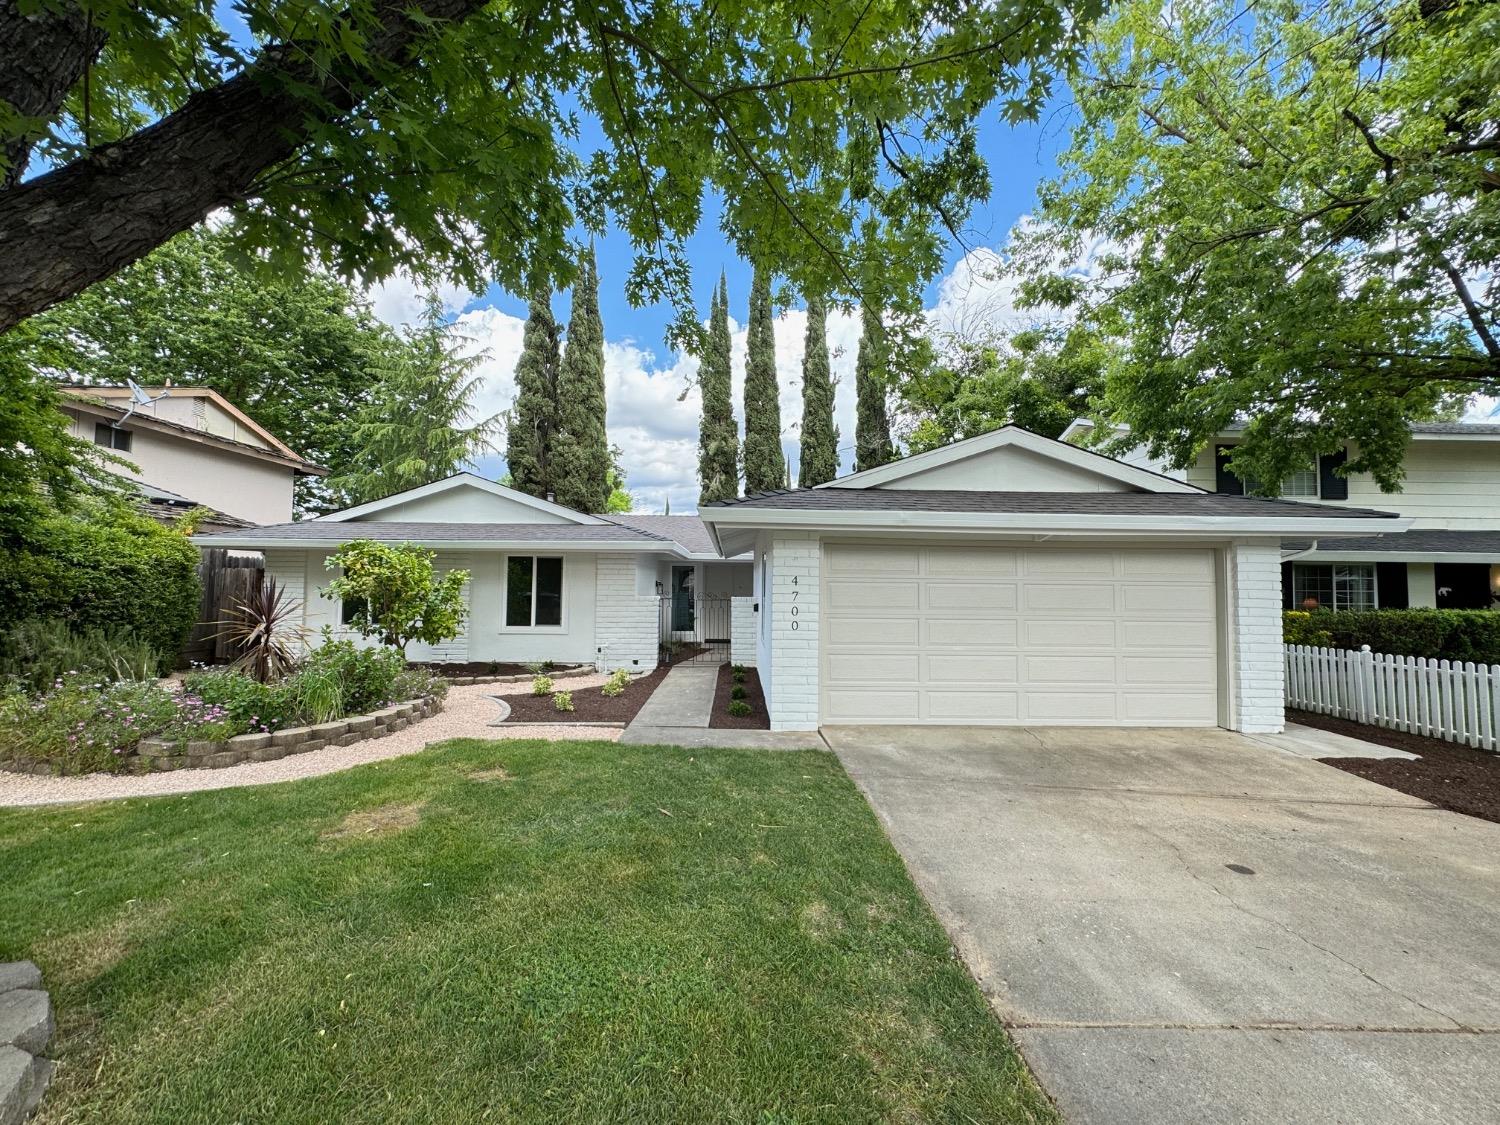 Photo of 4700 Meyer Wy in Carmichael, CA